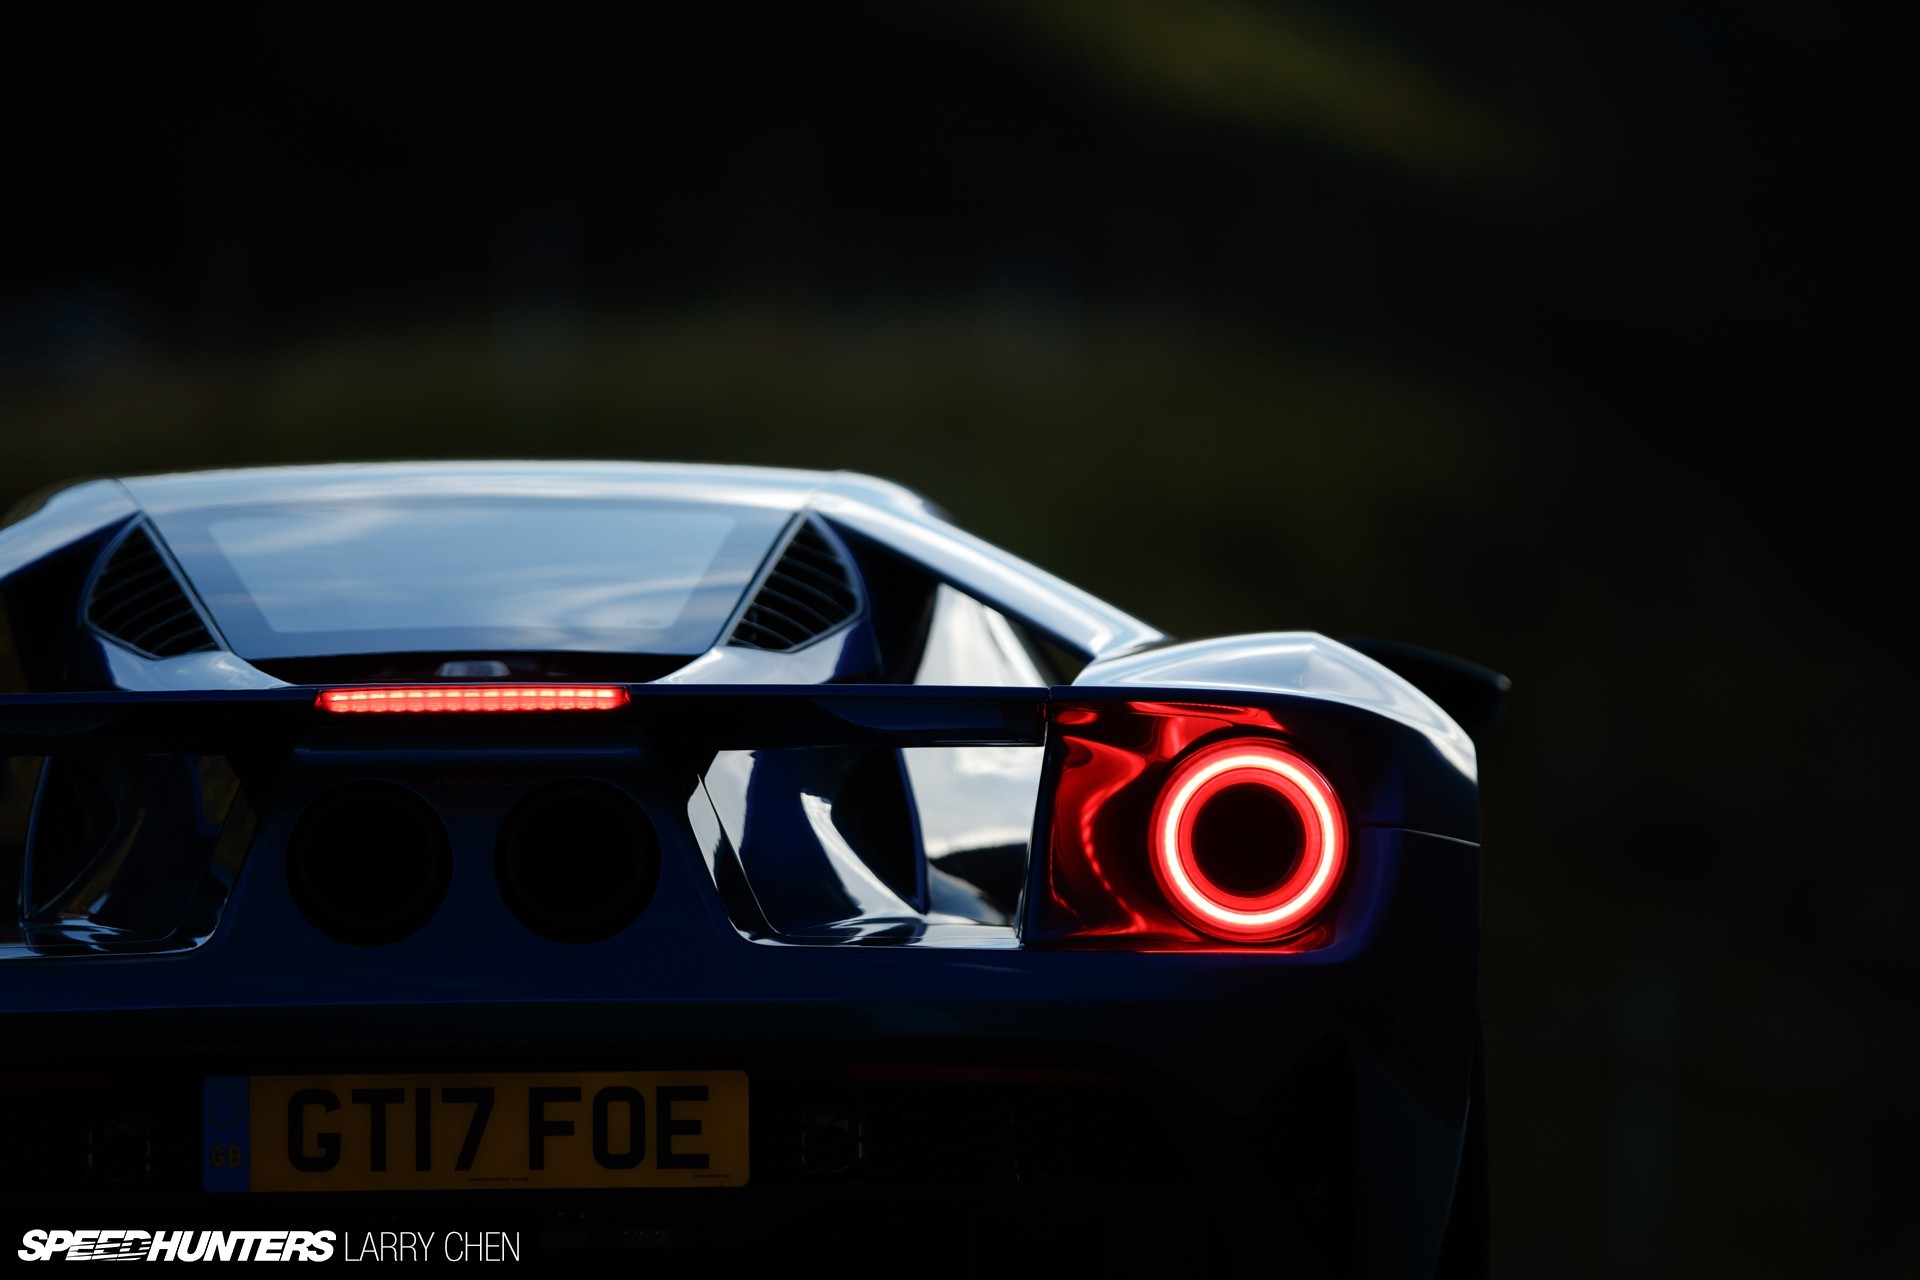 Ford Gtx1 Wallpapers